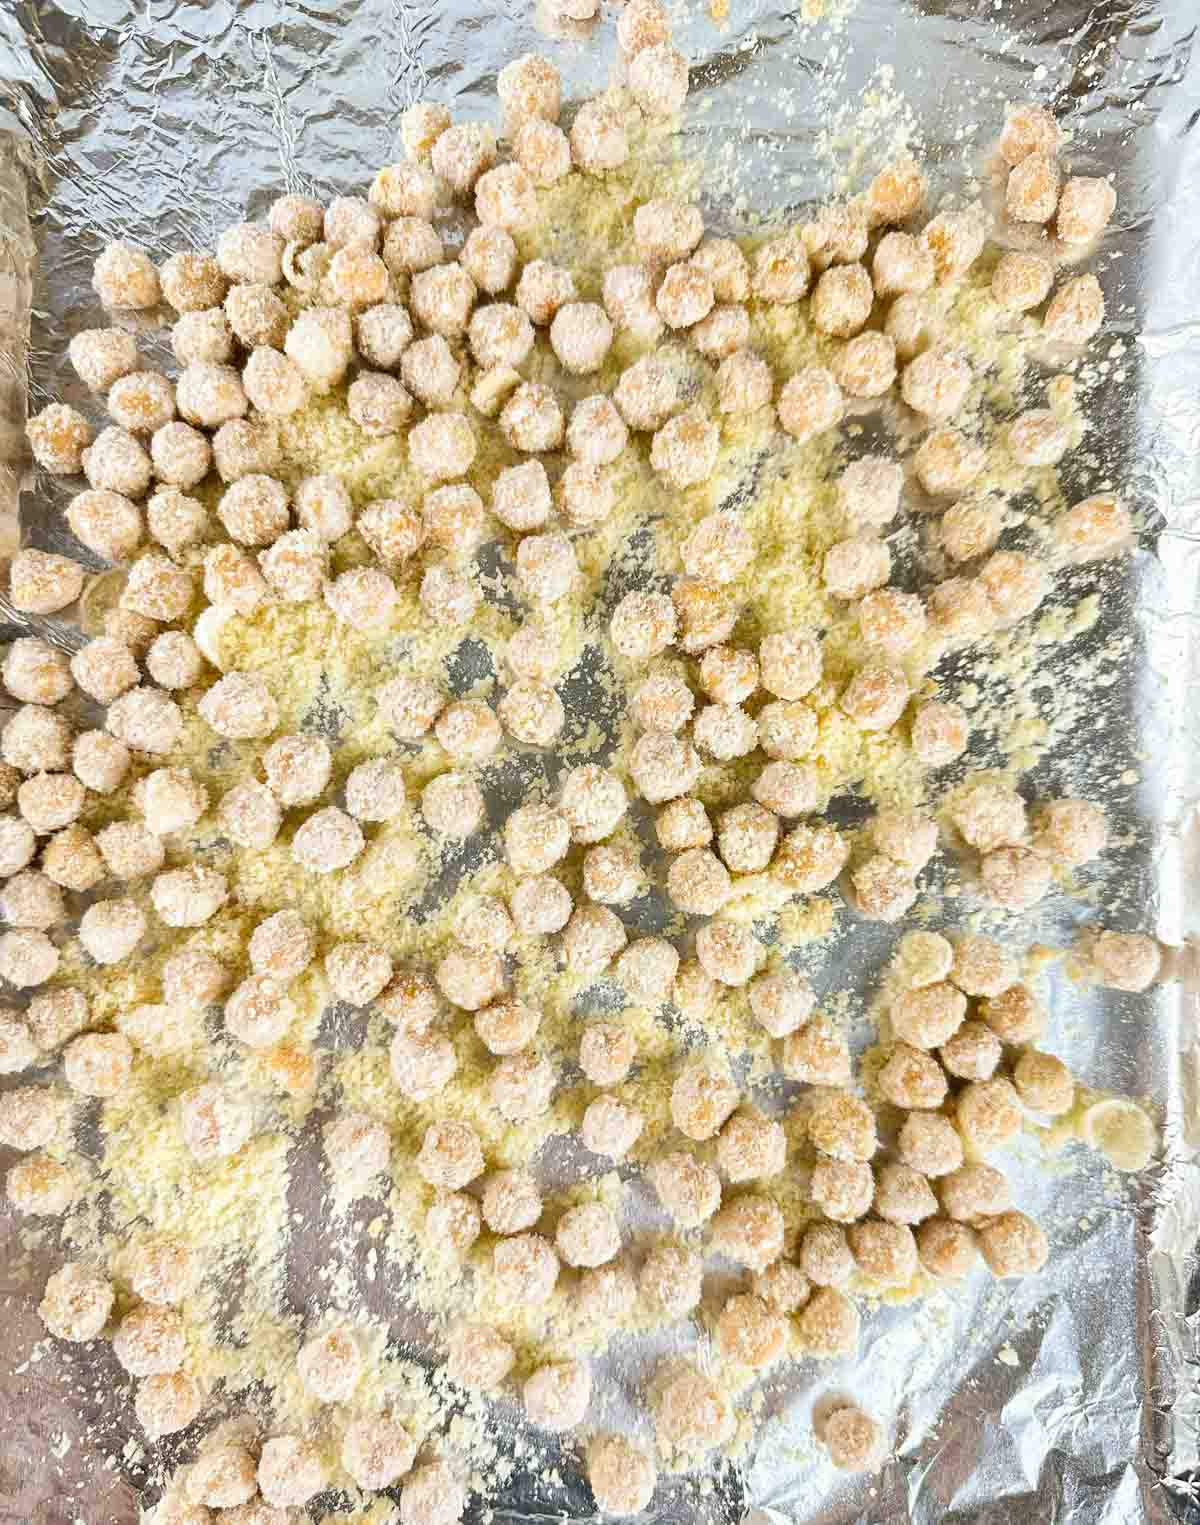 Spread the coated chickpeas out on a cooking sheet.